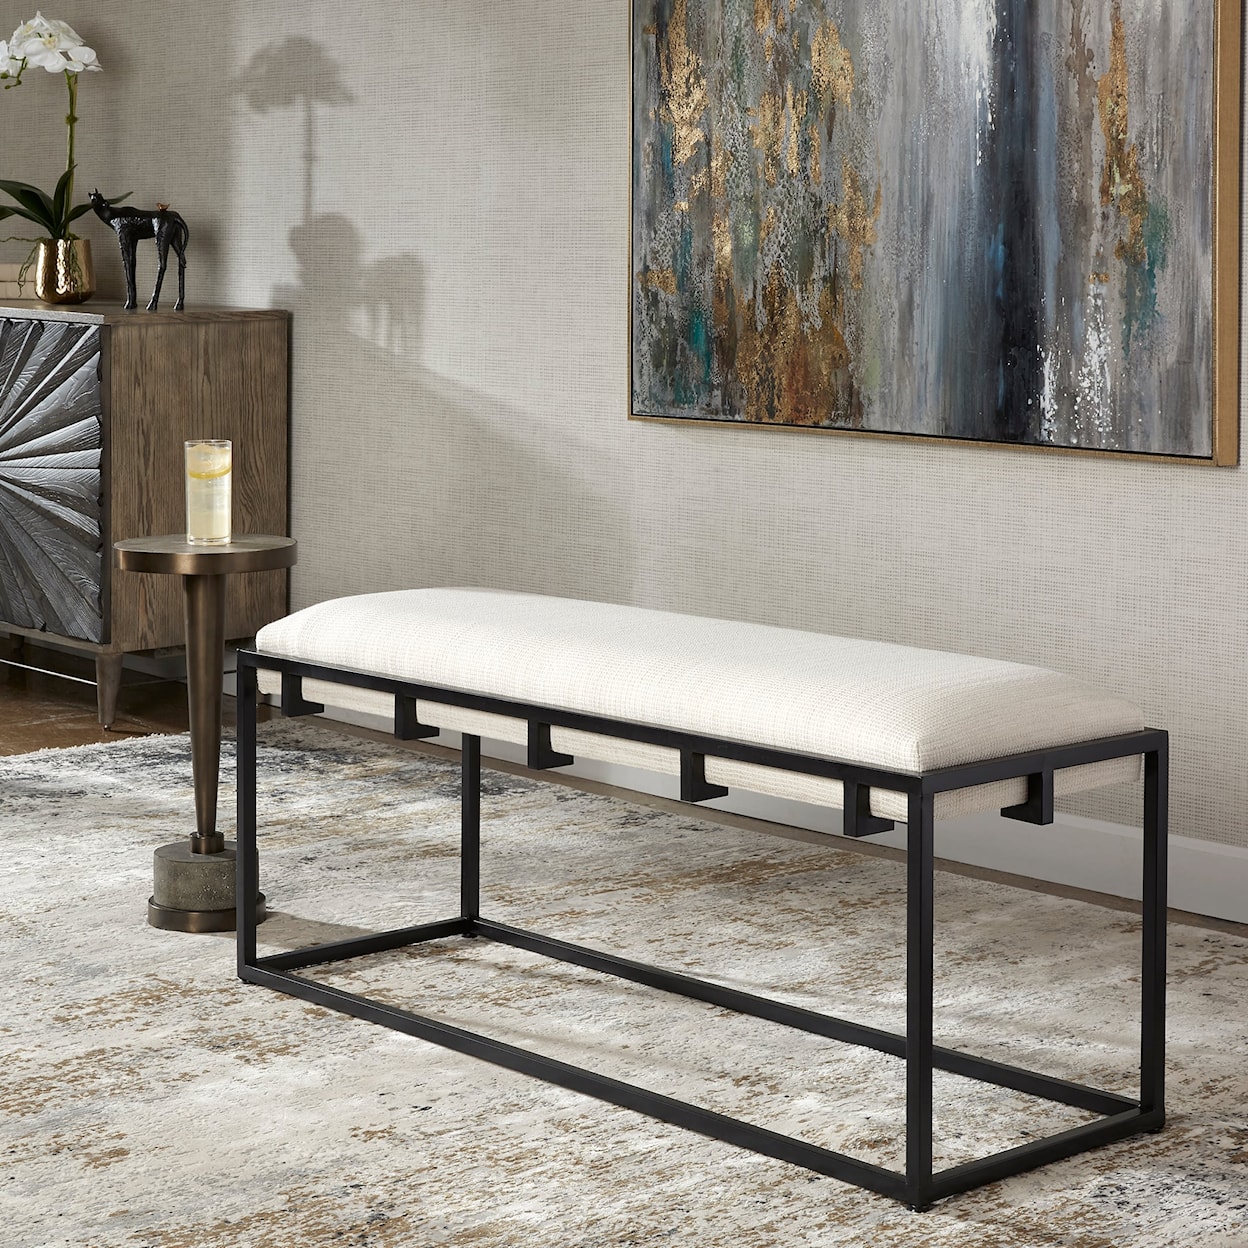 Uttermost Accent Furniture - Benches Bench